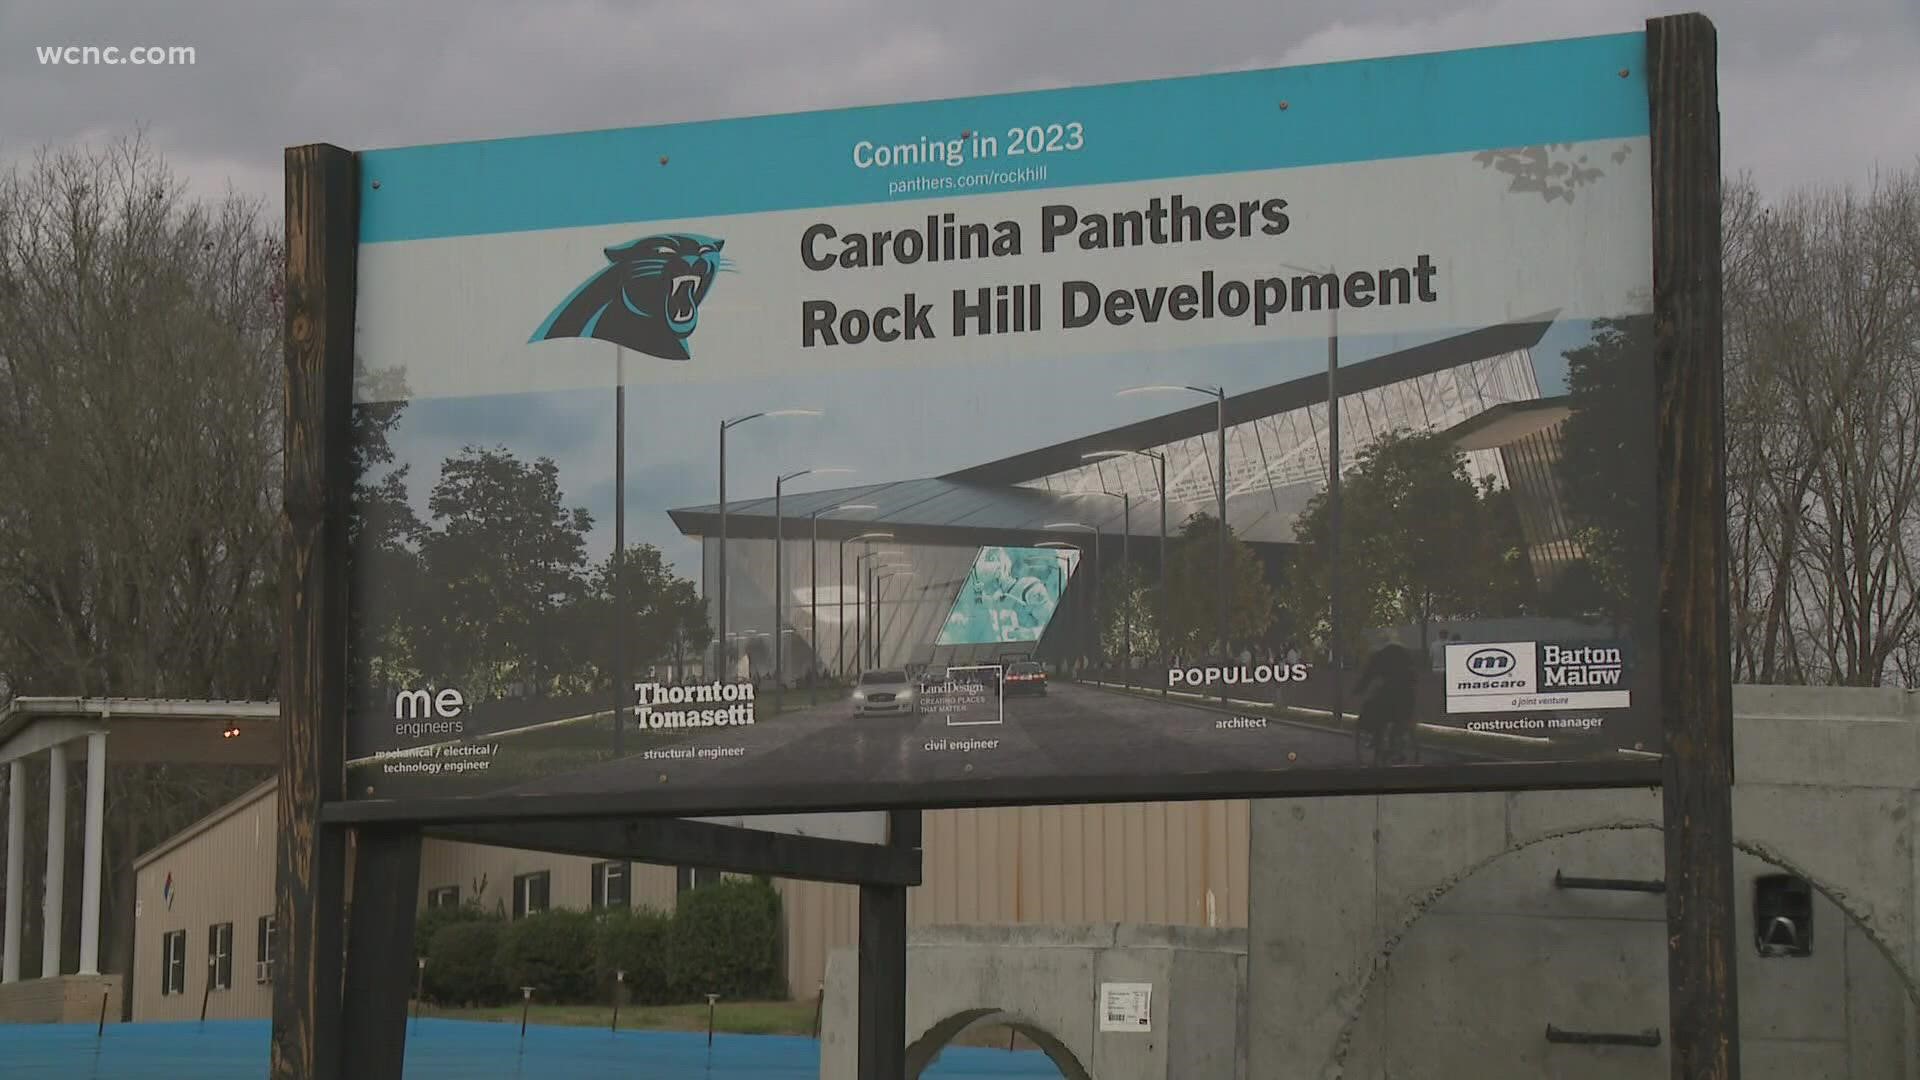 Construction on the new Carolinas Panthers training facility in Rock Hill, South Carolina is being "paused," WCNC Charlotte has independently confirmed.